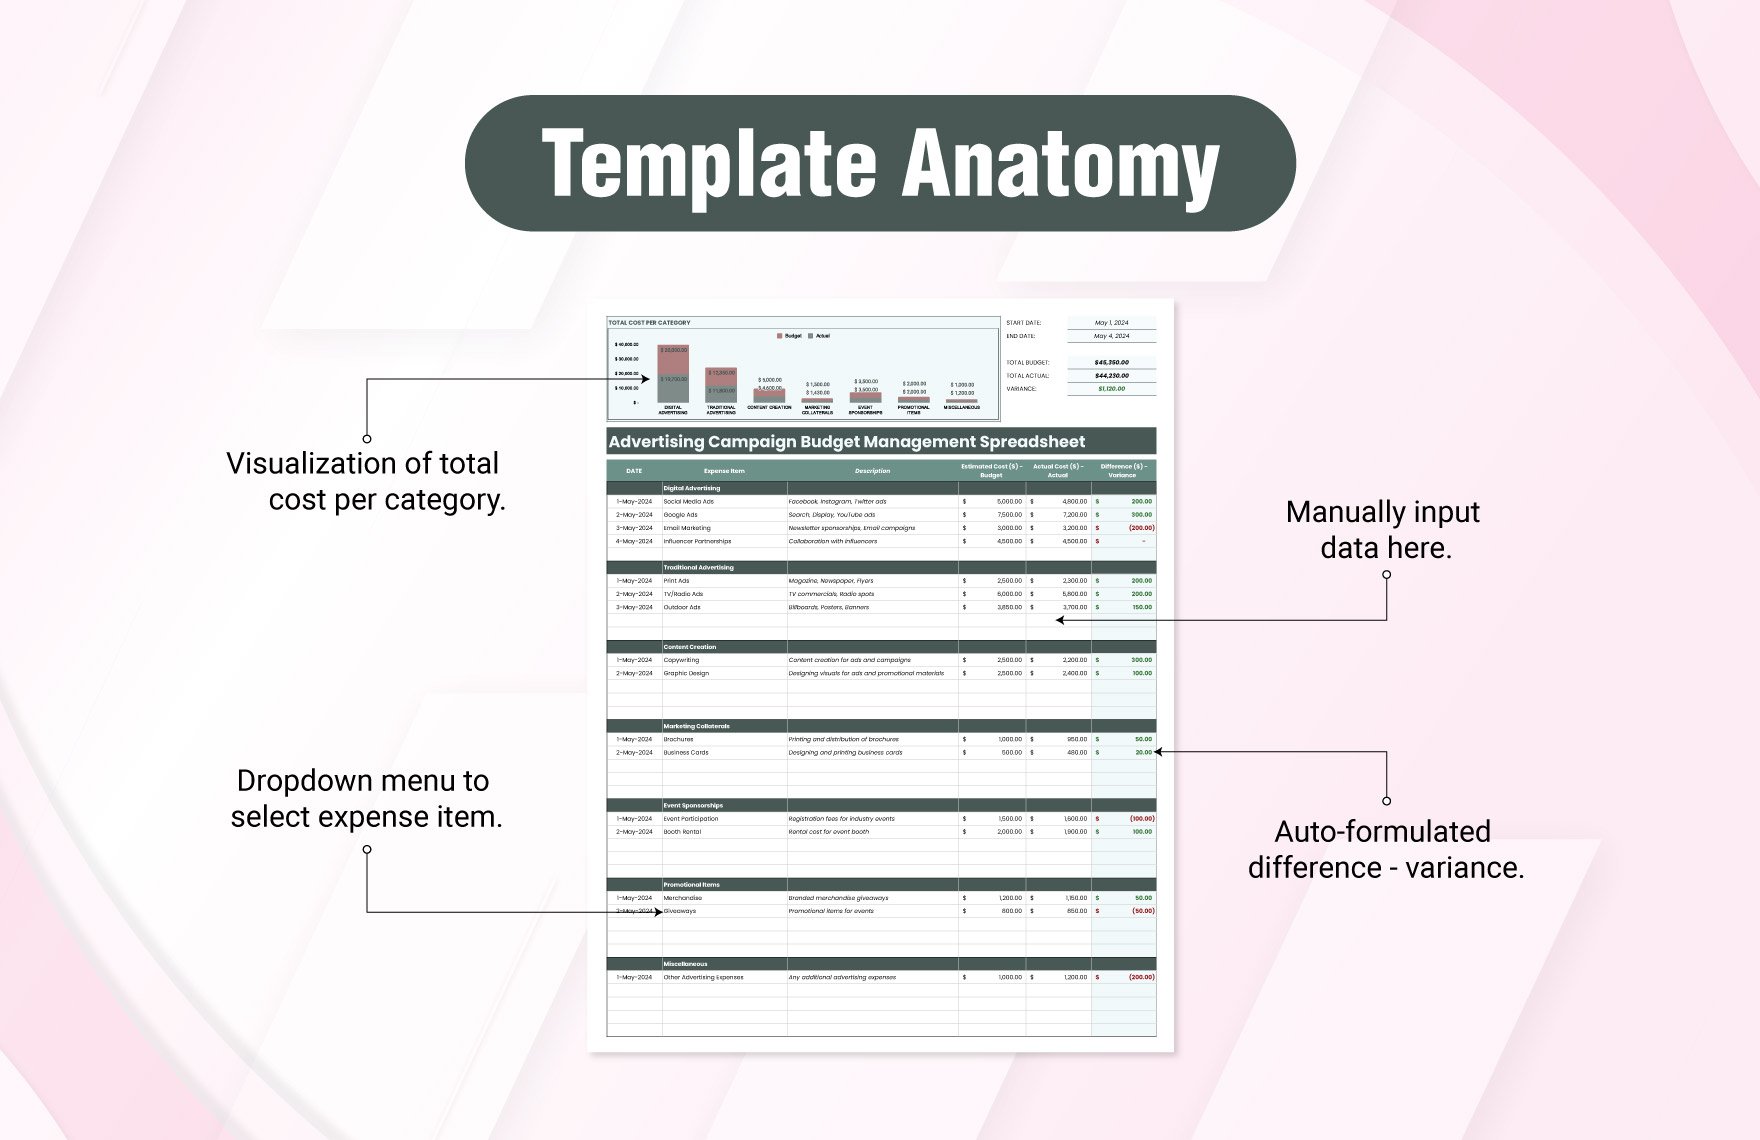 Advertising Campaign Budget Management Spreadsheet Template